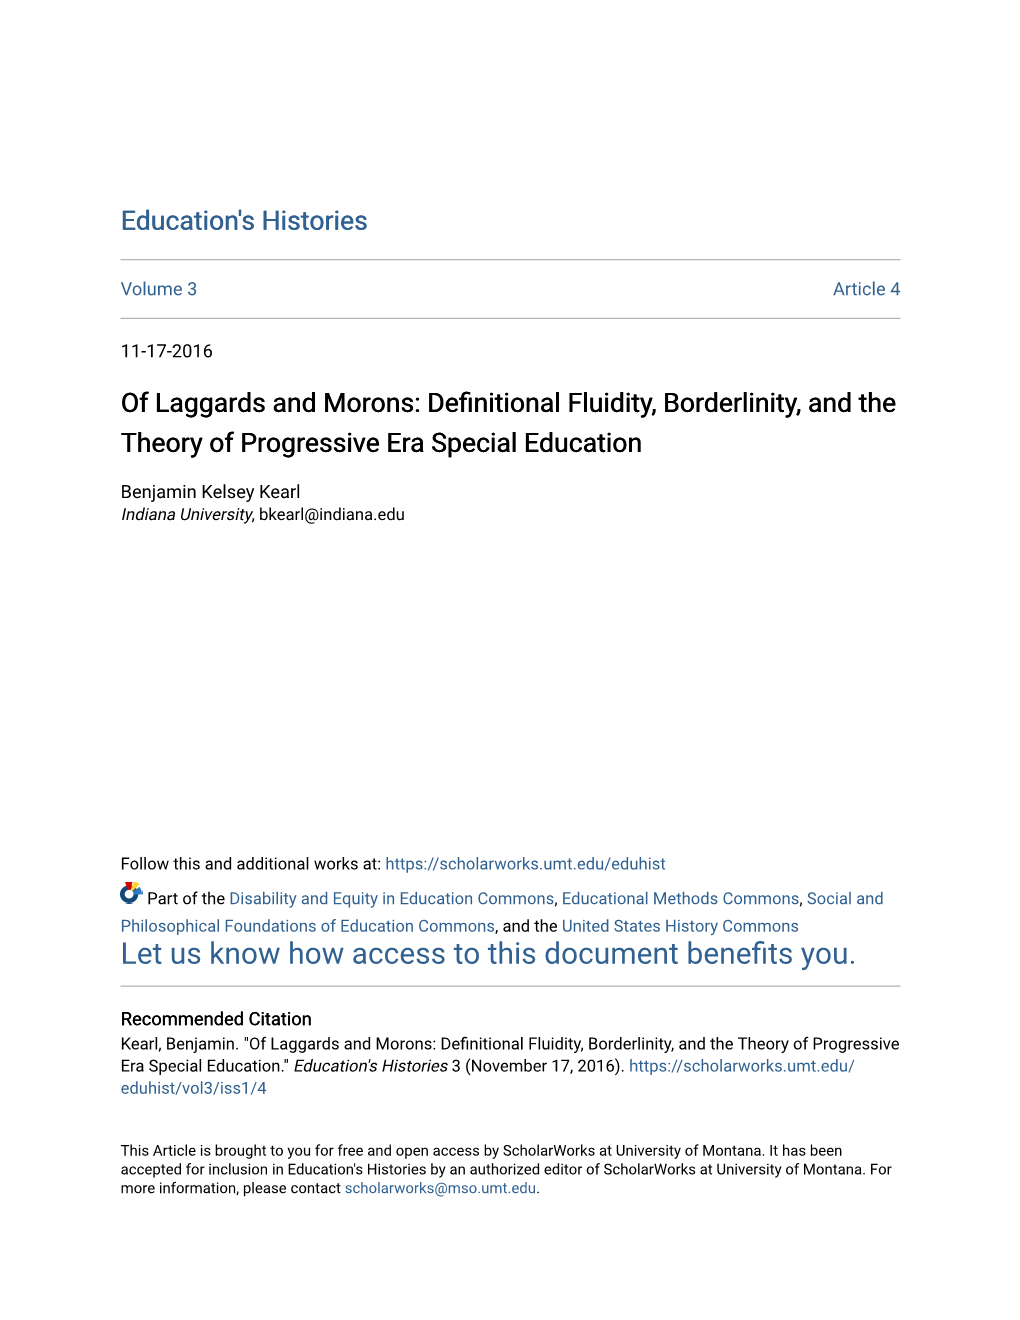 Of Laggards and Morons: Definitional Fluidity, Borderlinity, and the Theory of Progressive Era Special Education